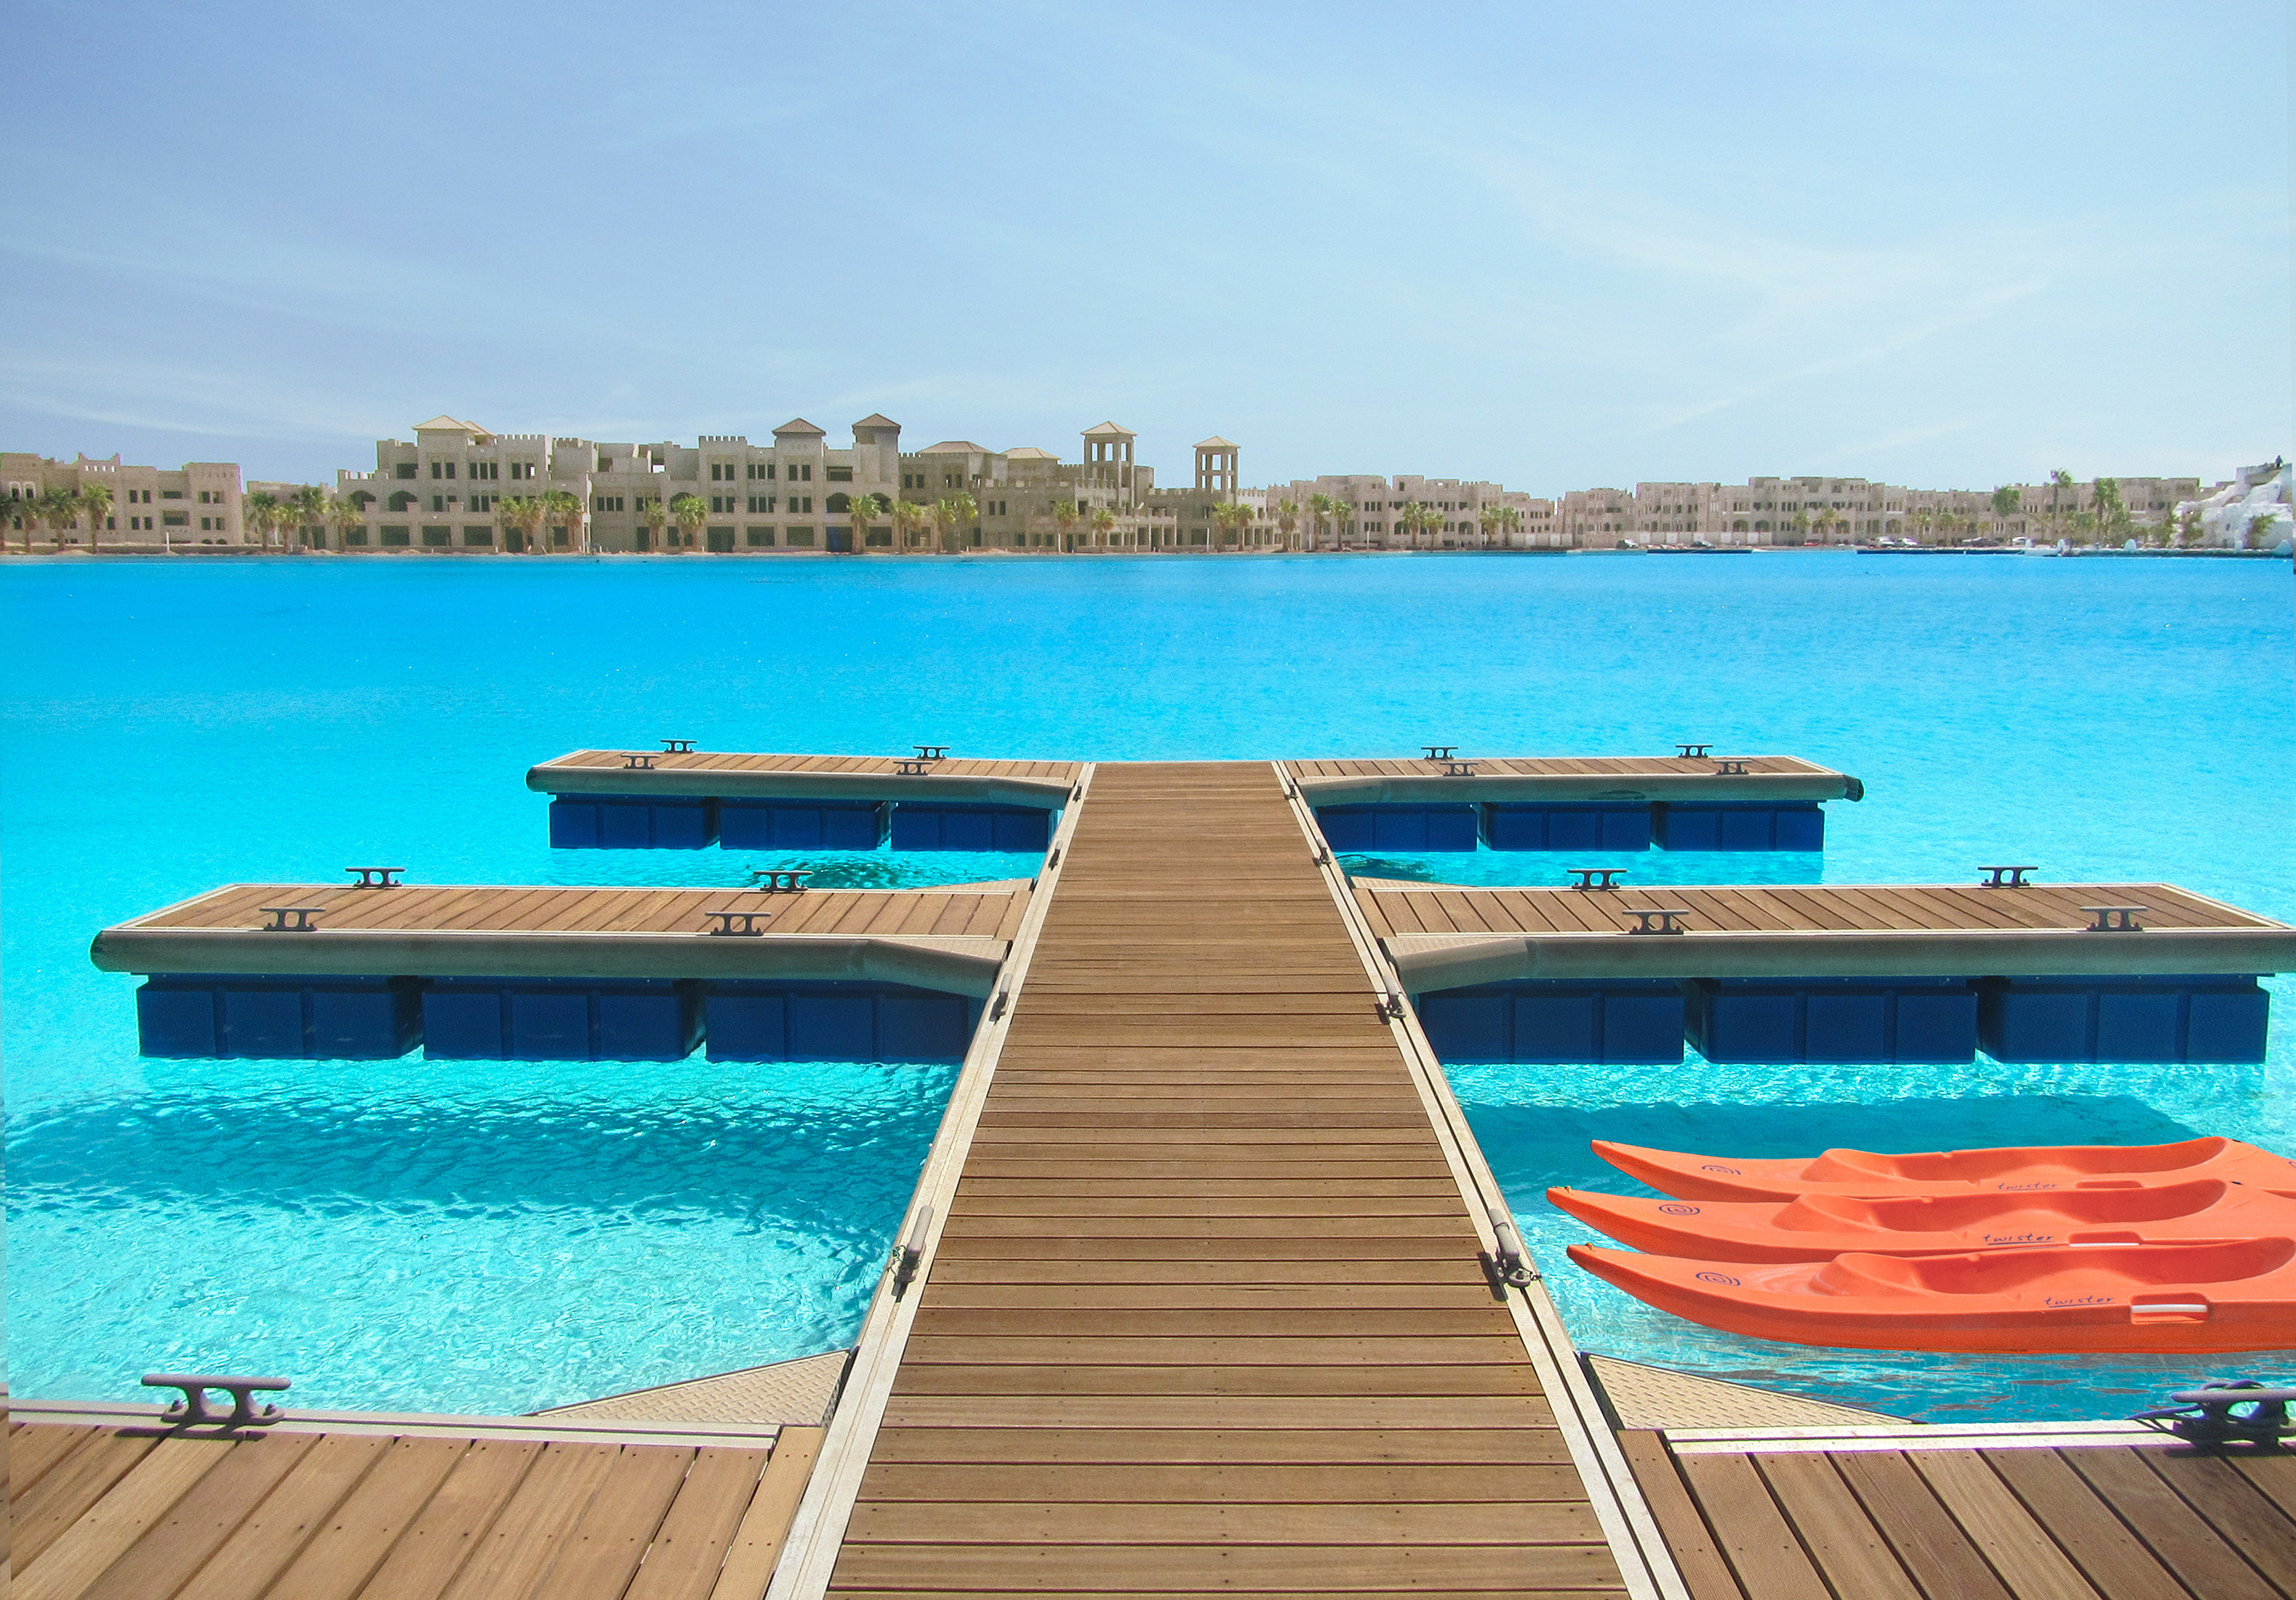 Crystal Lagoons Corp awarded a second Guinness World Record to its growing list of global accolades with the company’s 12.5-hectare Sharm El Sheikh man-made lagoon project.